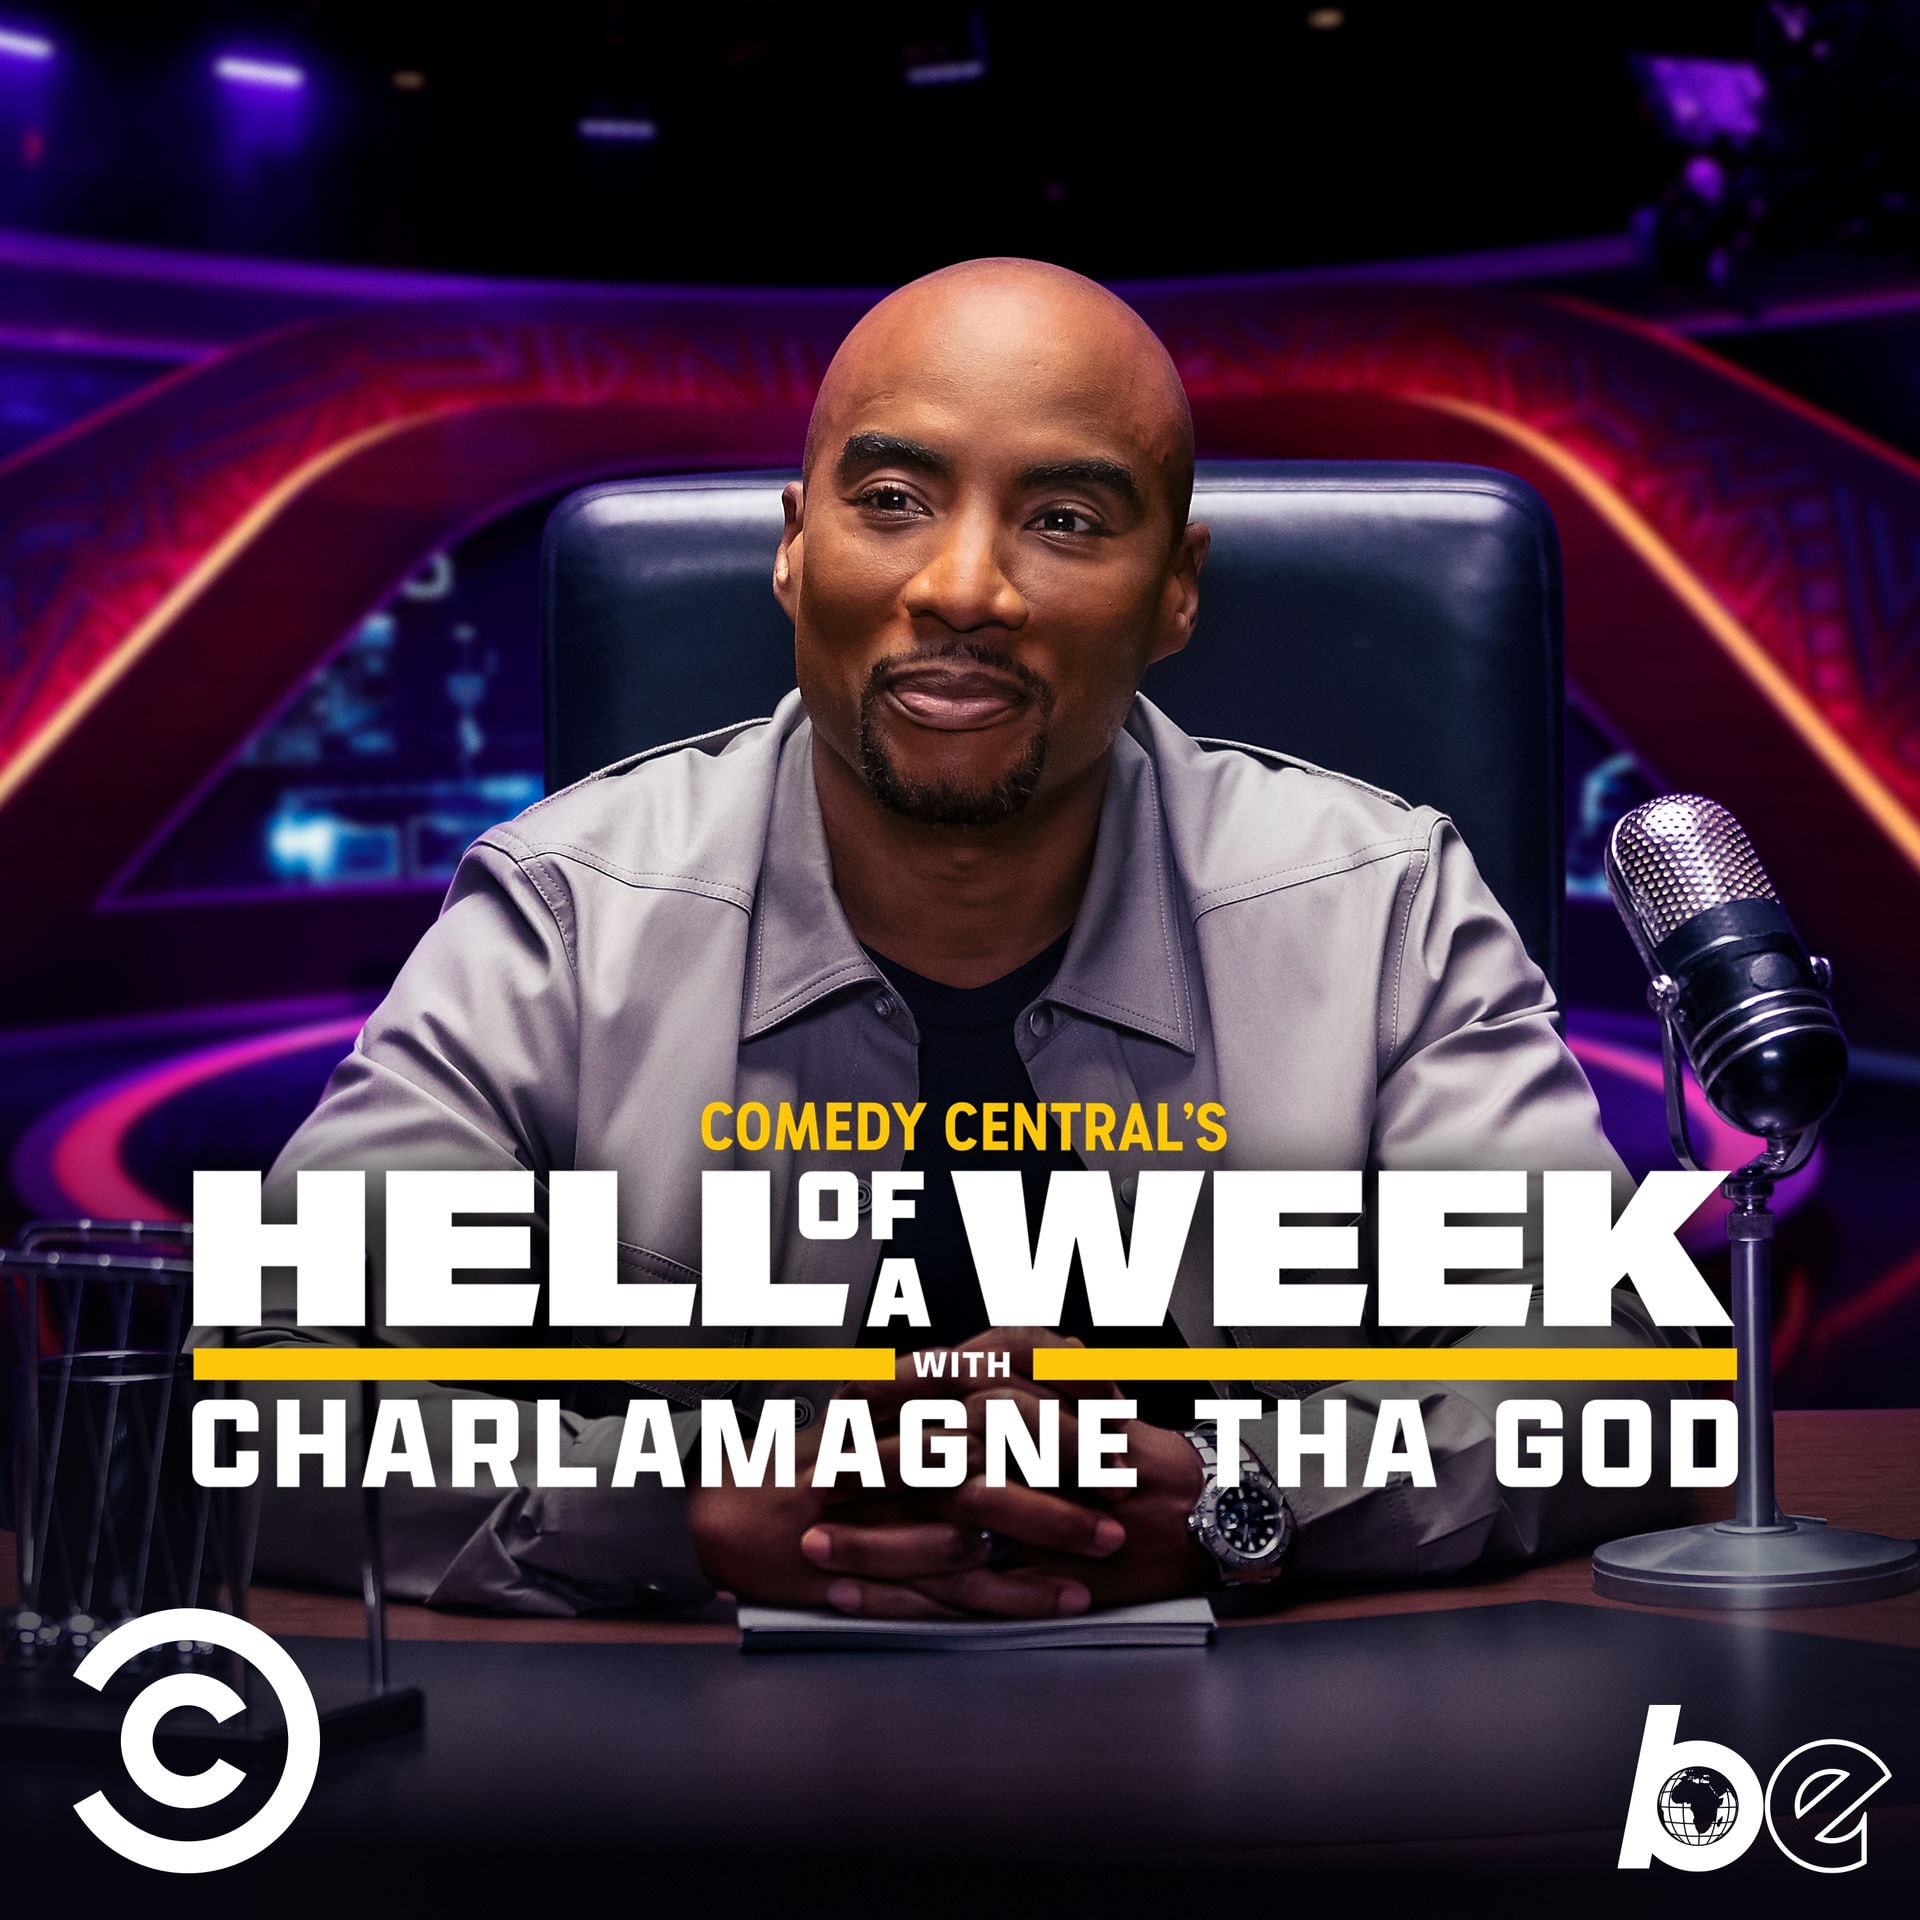 Comedy Central's Hell of a Week Charlamagne Tha God